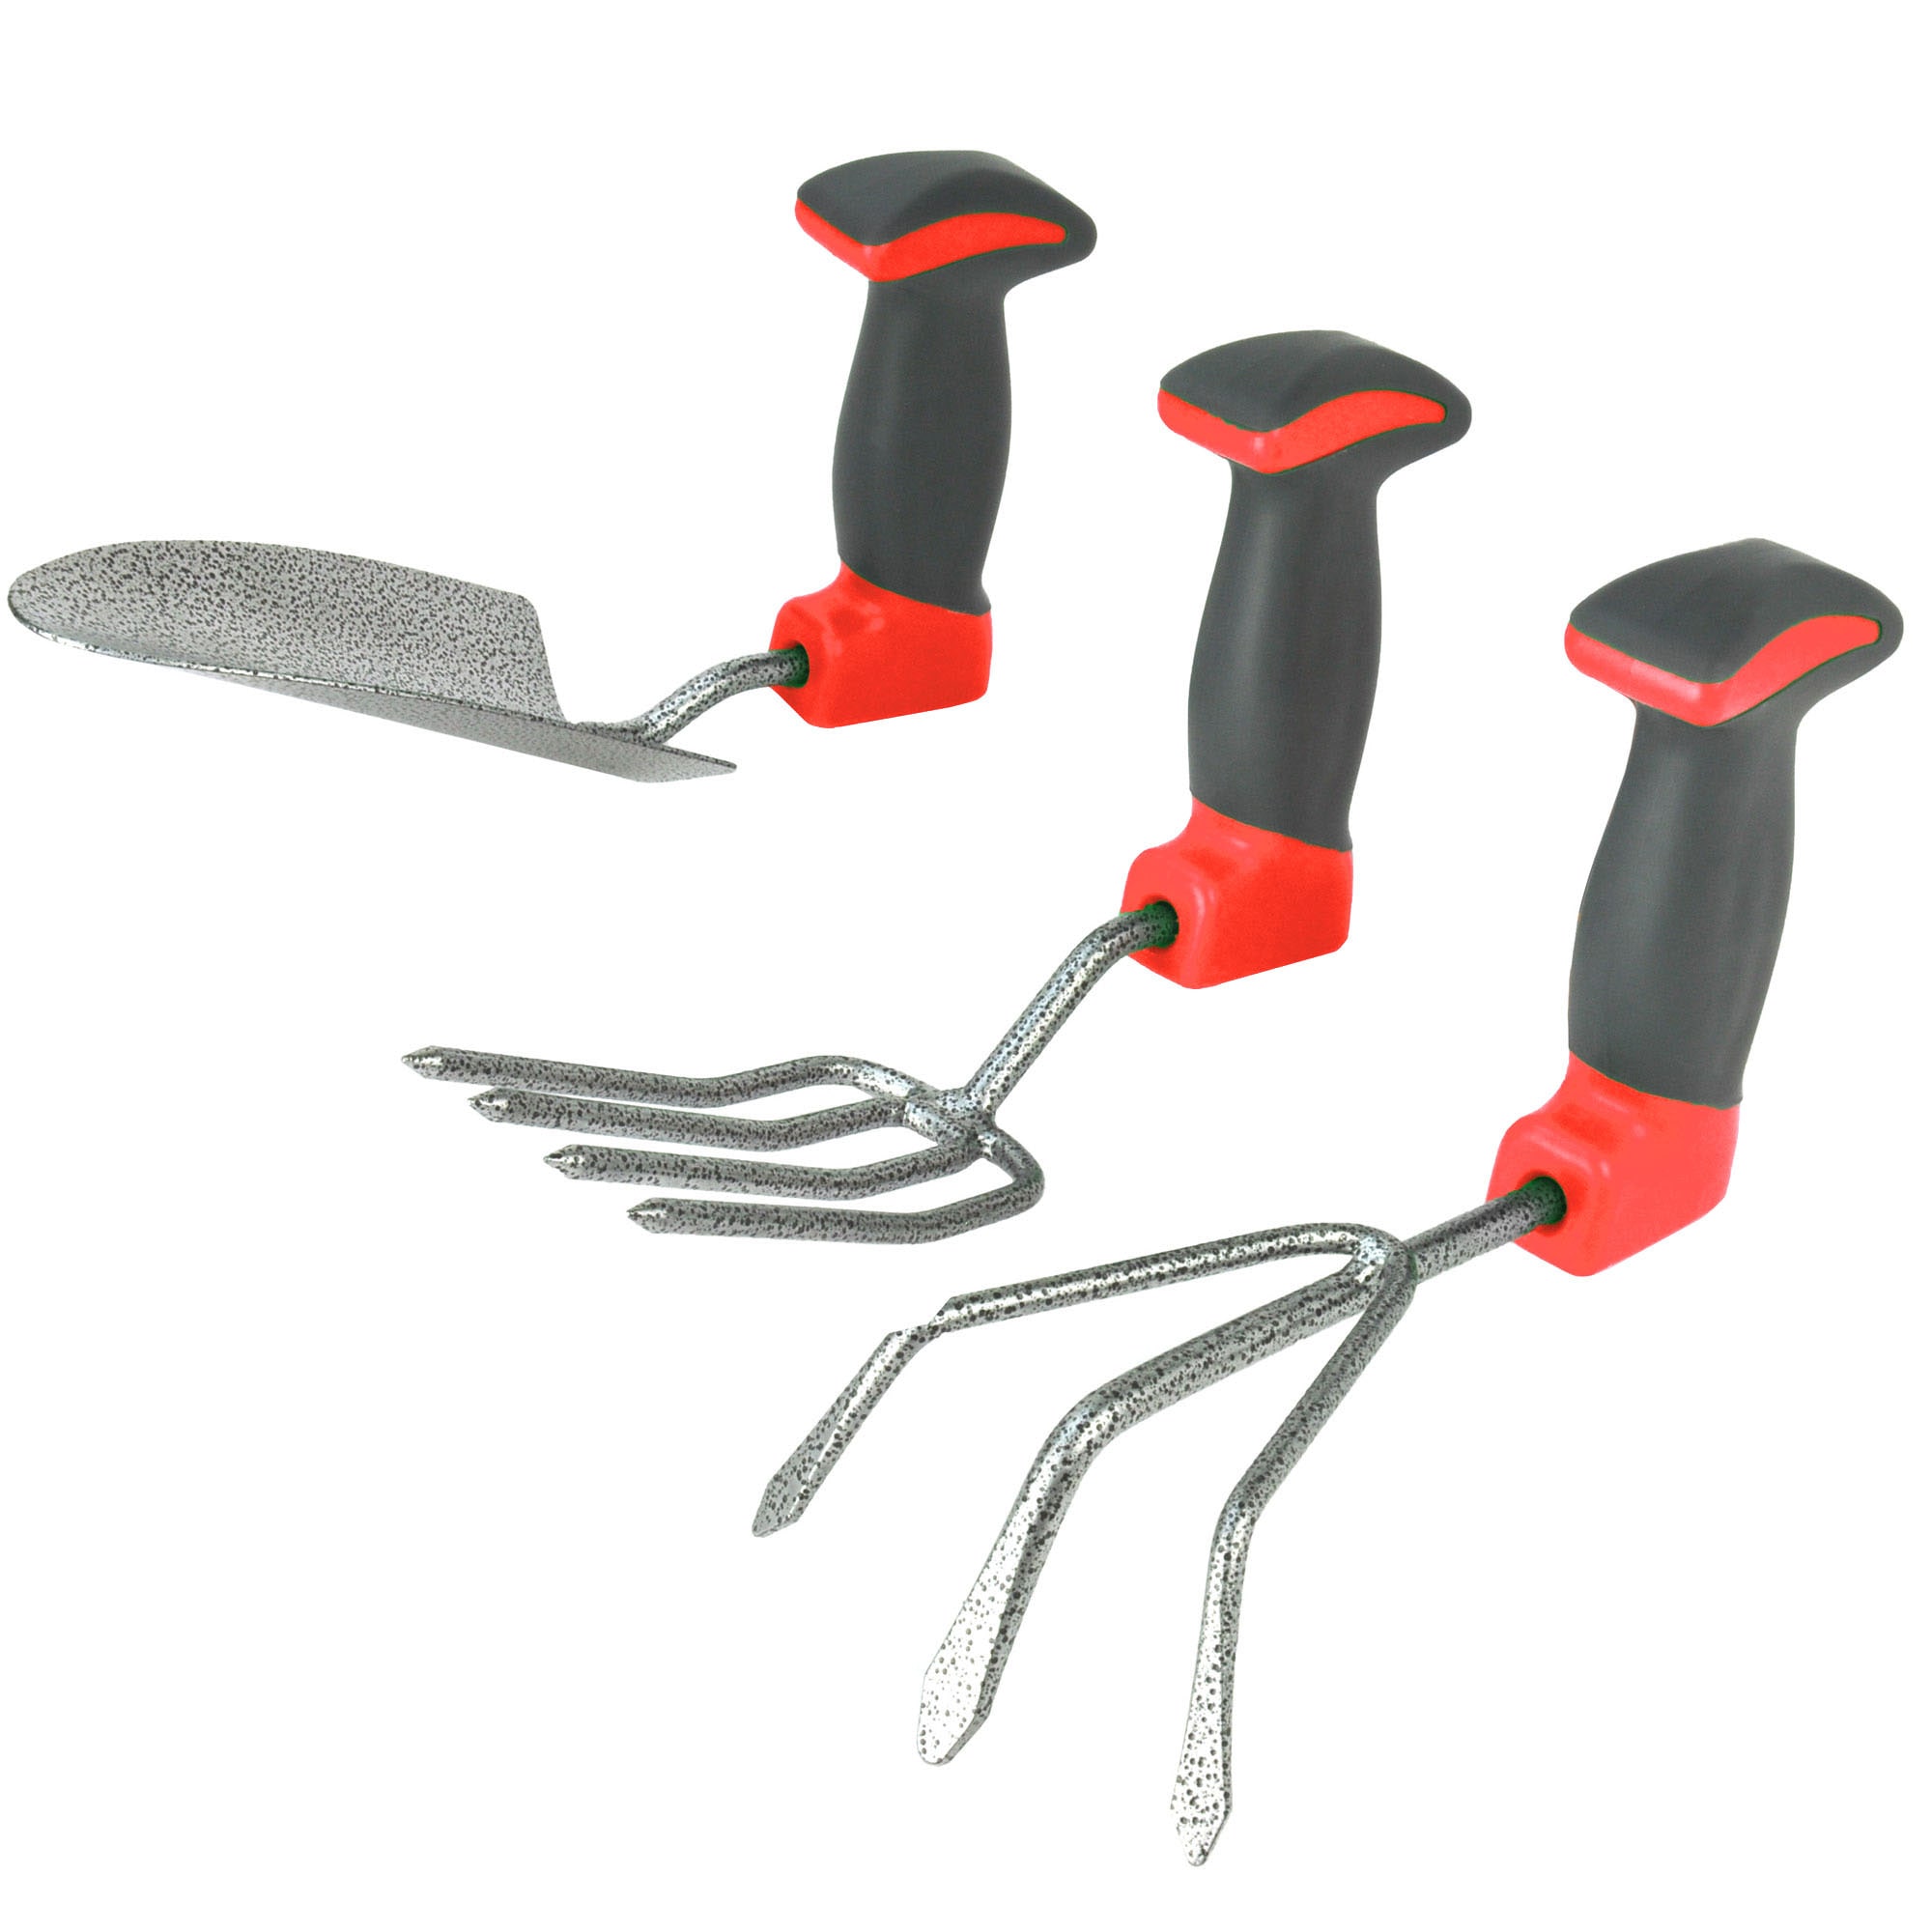 Easy Grip Garden Tool Set - Red Garden Hand Tool Kits at Lowes.com